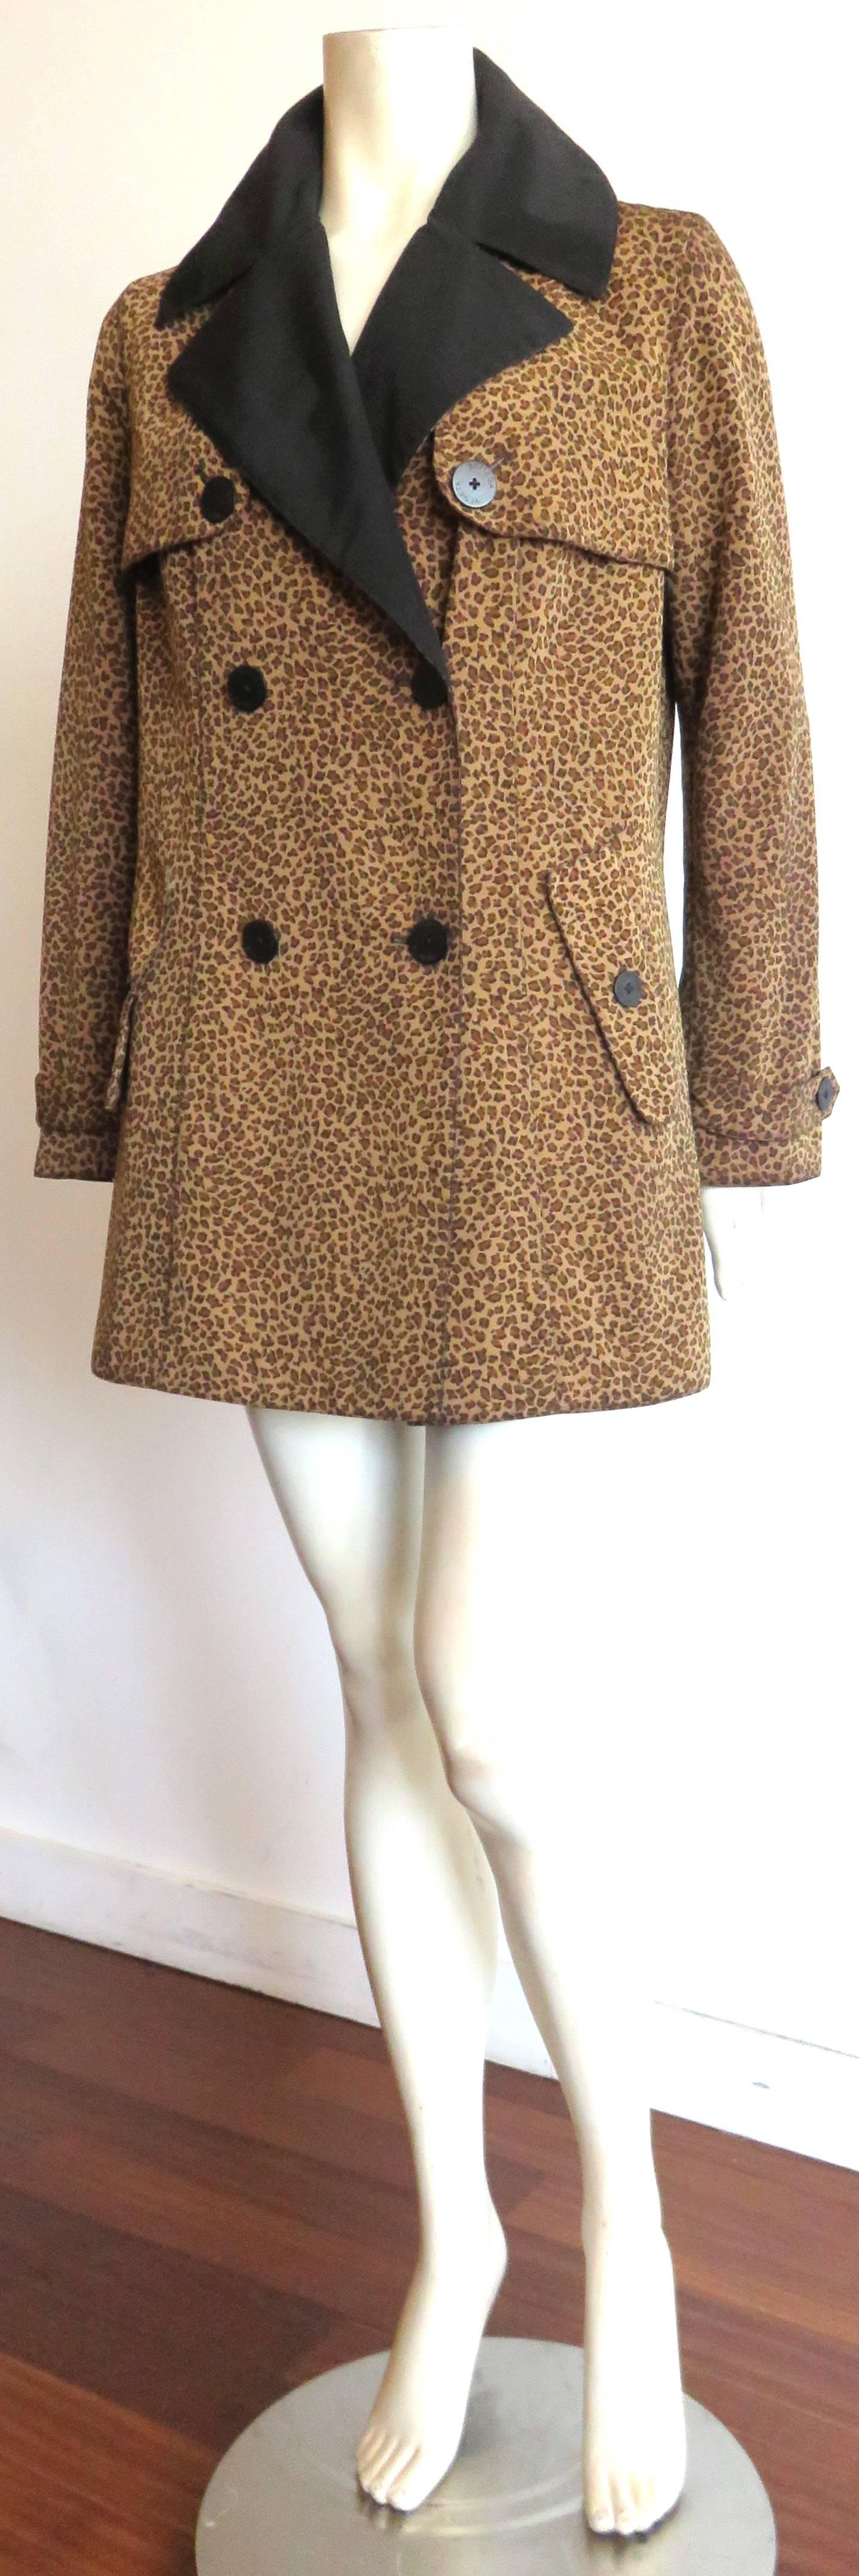 1990's BOTTEGA VENETA Leopard print raincoat with solid black label and collar detail.

Twin flap detail at front chest.

Logo engraved, large, black button closures.

Twin side pockets.

Coated/treated fabric, intended for water